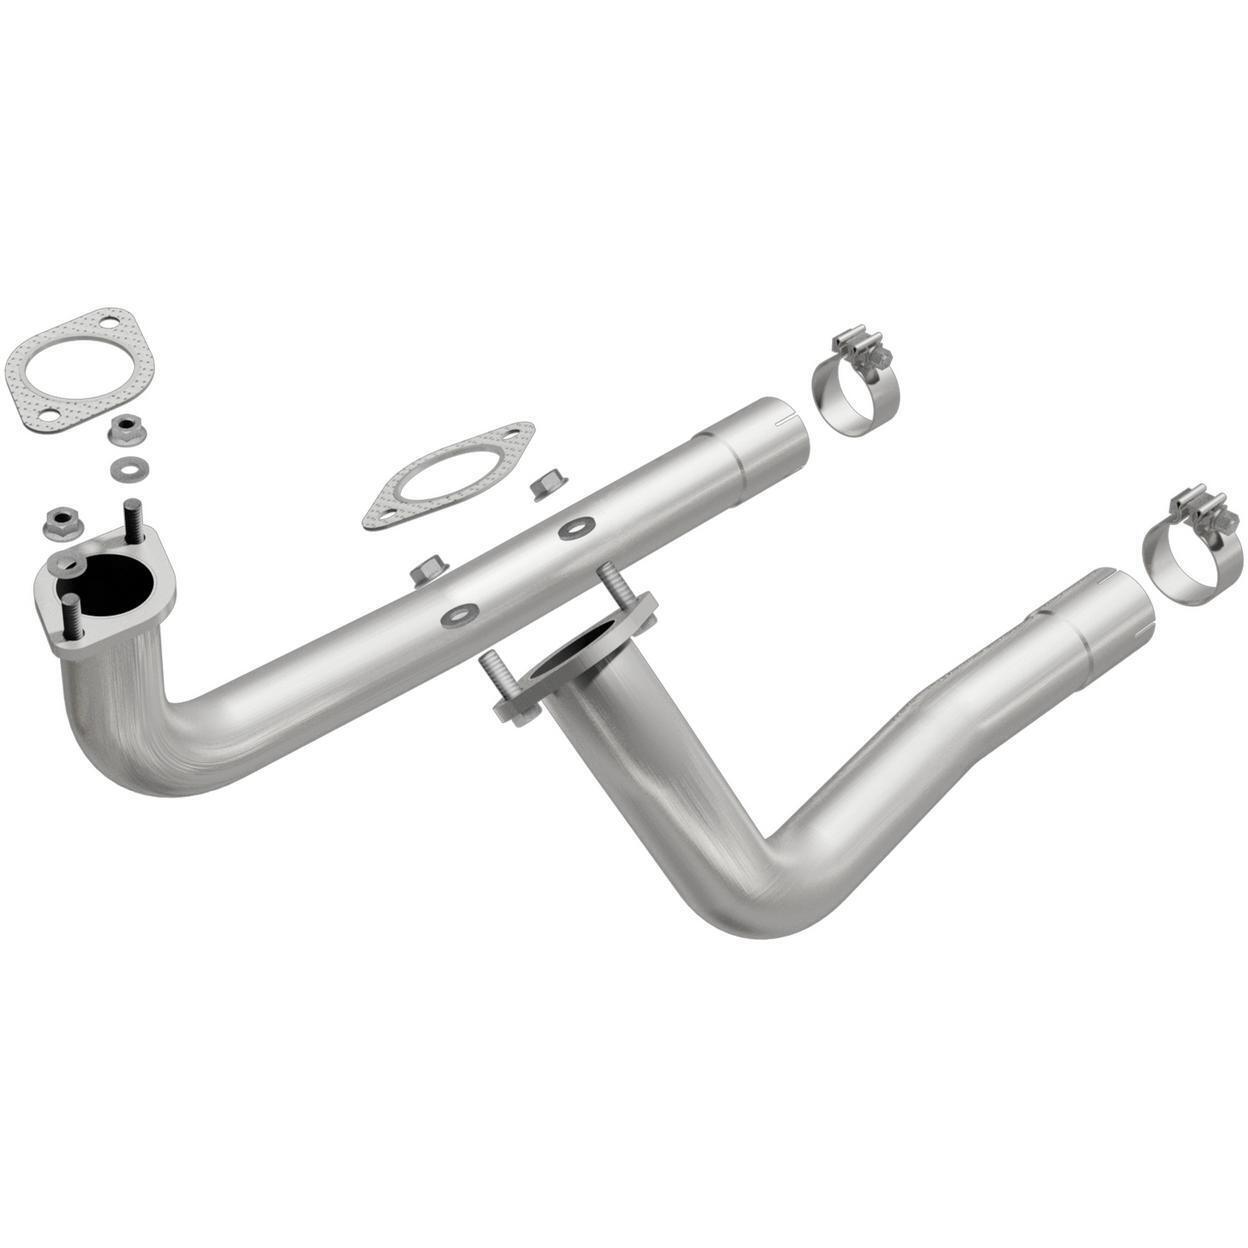 Exhaust Pipe for 1967-1970 Dodge Coronet 7.2L V8 GAS OHV